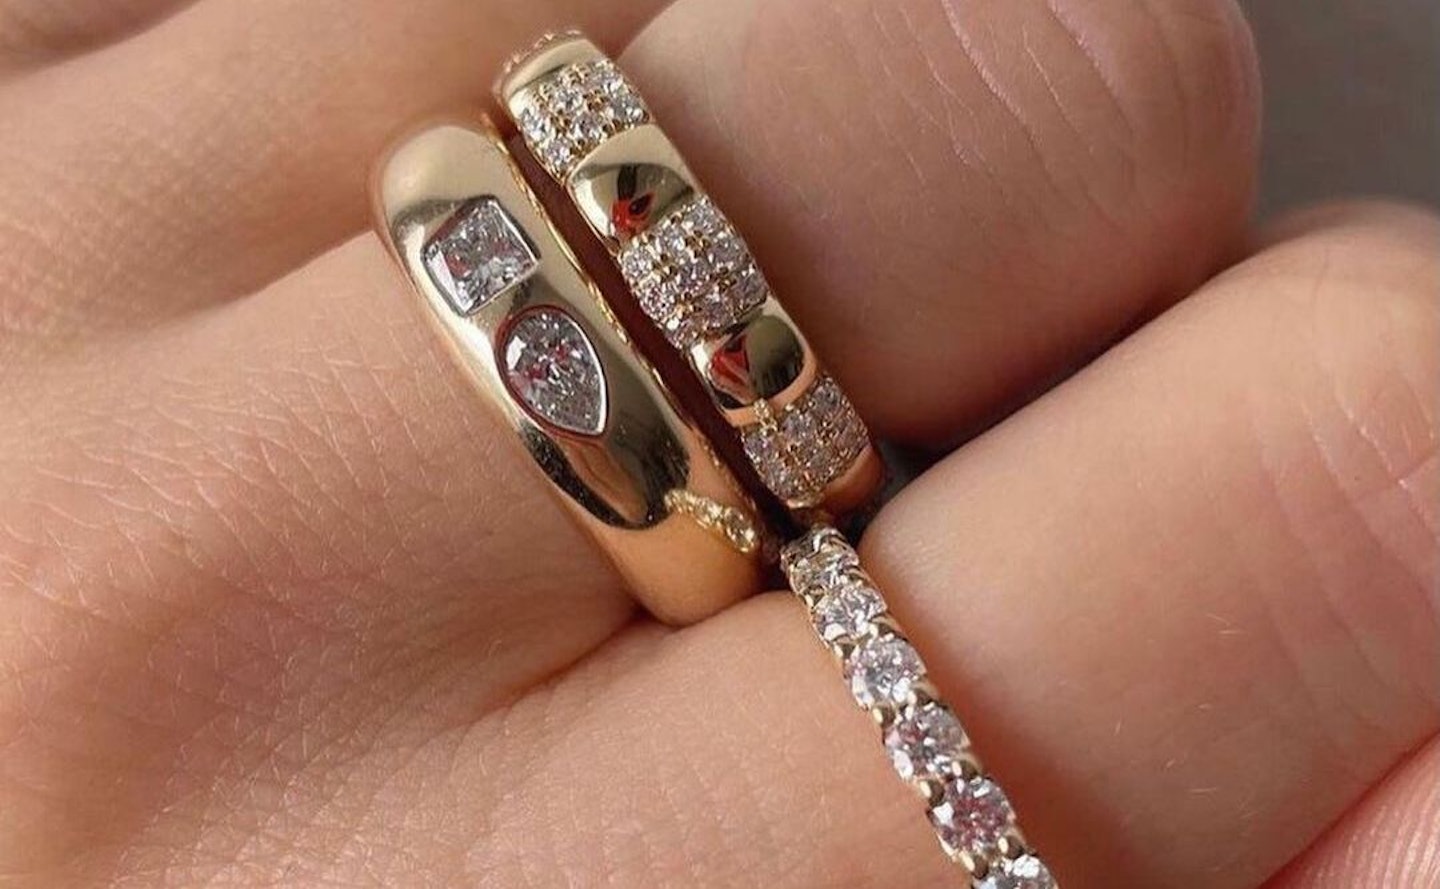 mejuri - wedding rings - what you need to know